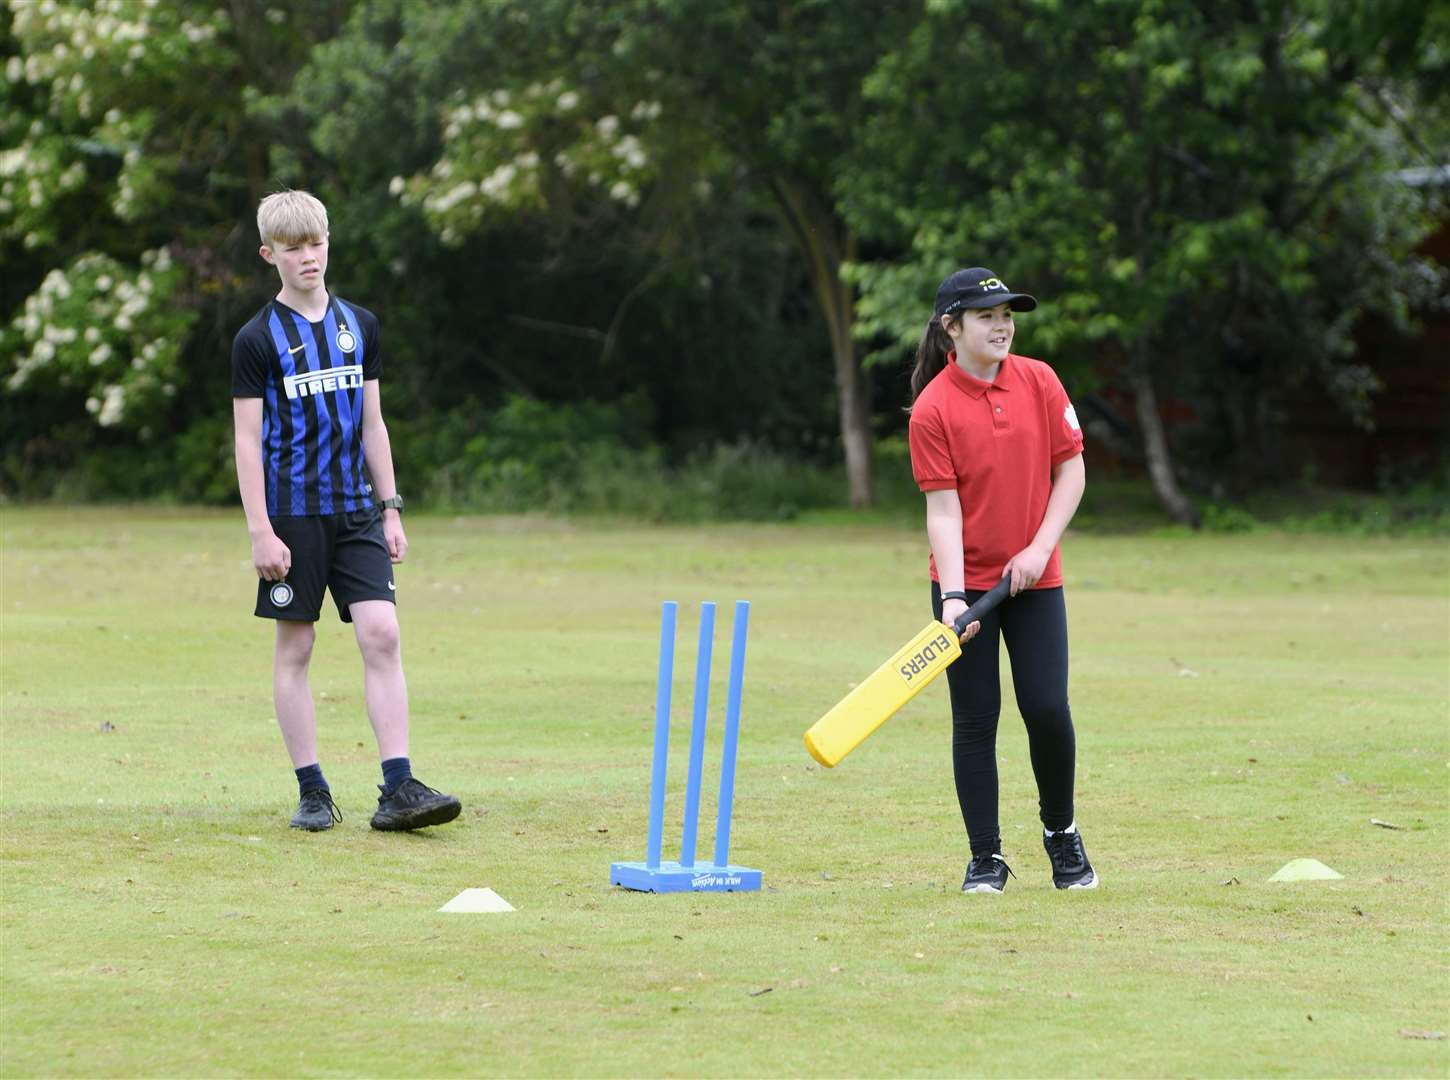 Rady for the next ball. Huntly Primary School Cricket Tournaments...Pictures: Beth Taylor.